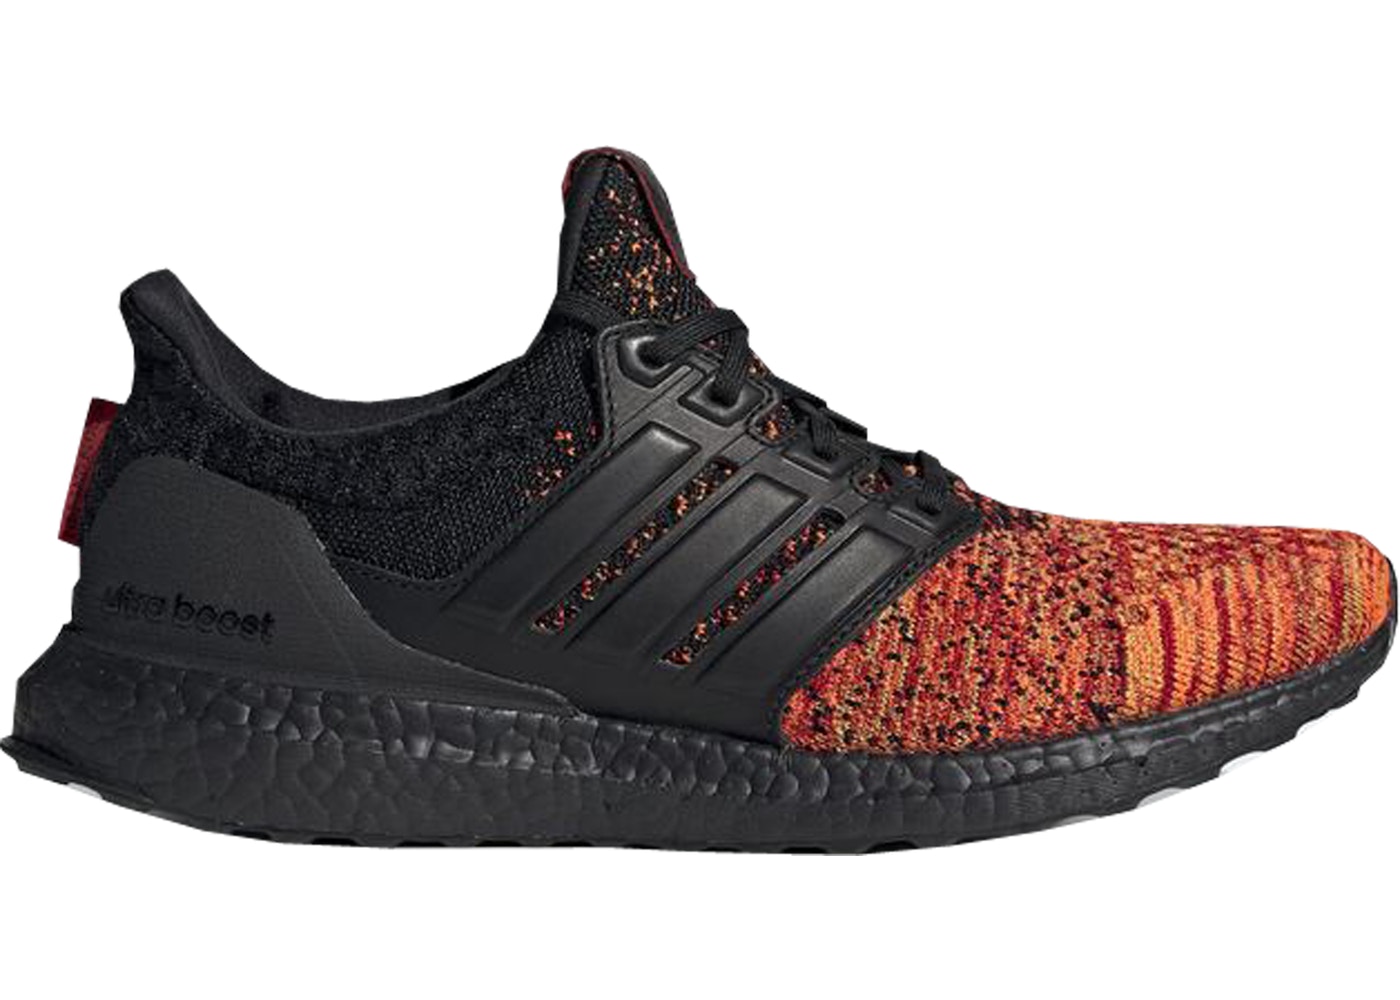 adidas ultra boost games of thrones